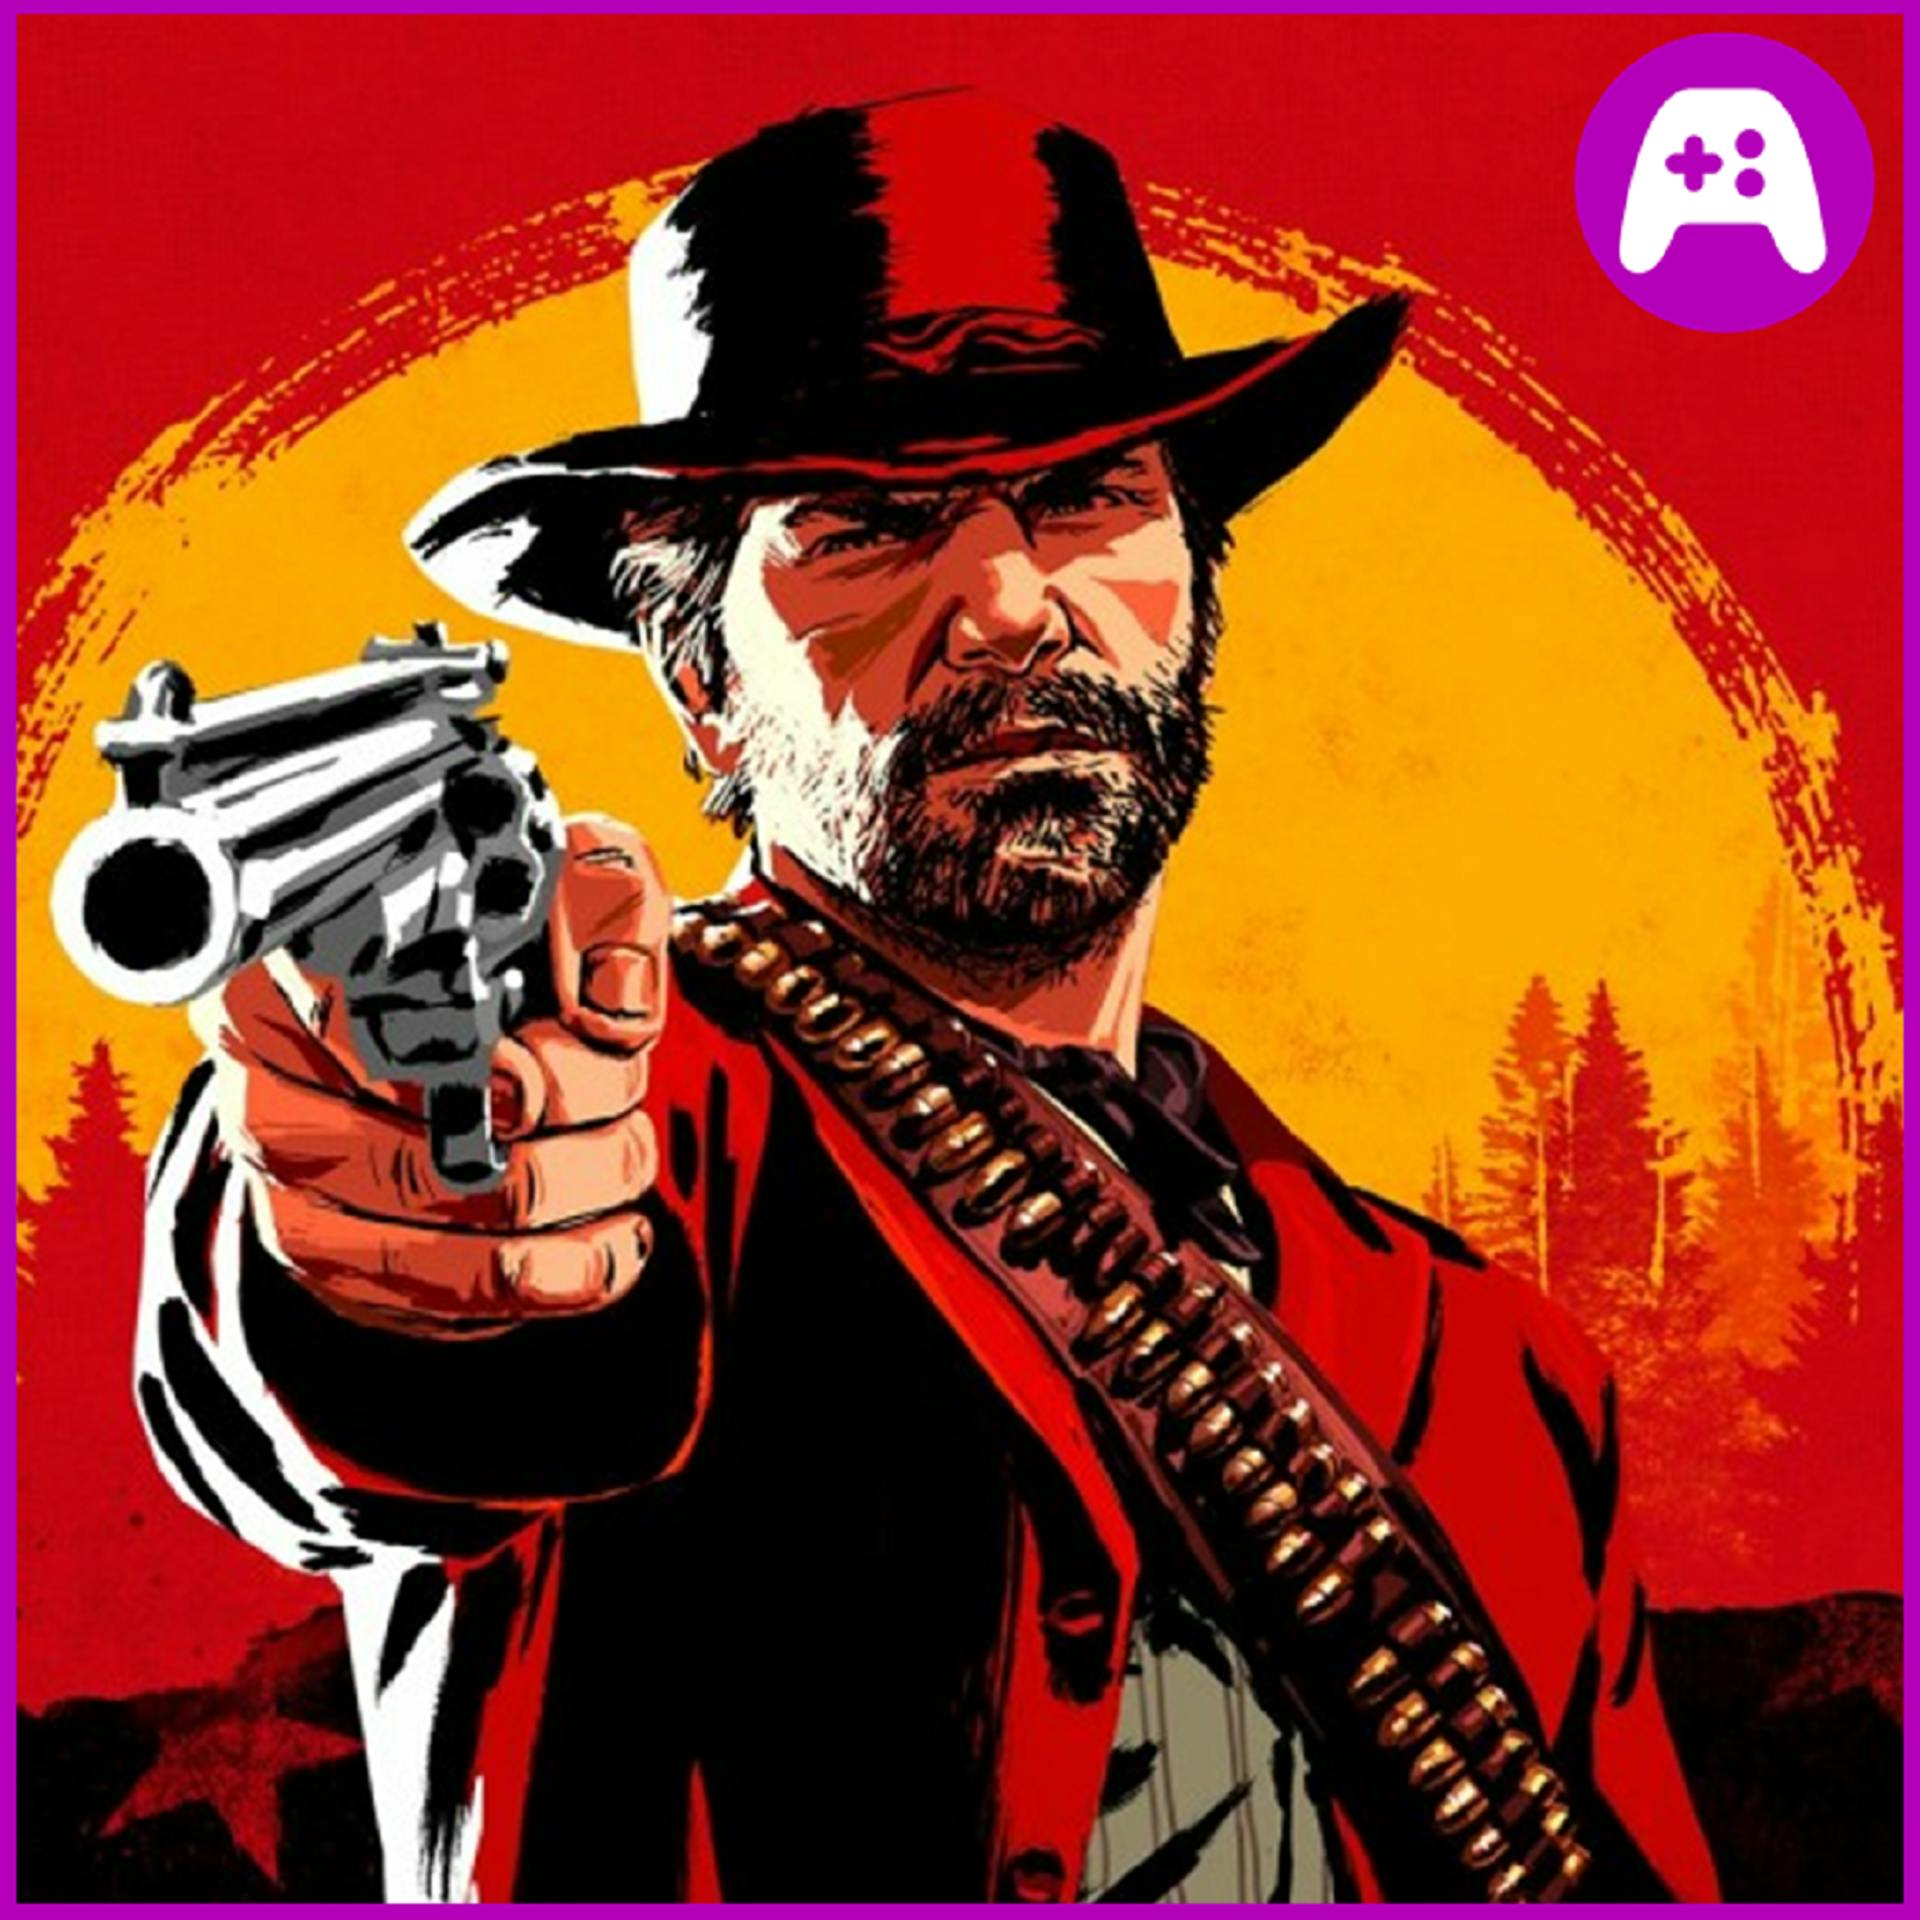 Red Dead Redemption 2 Review in Progress - What's Good Games (Ep. 76)